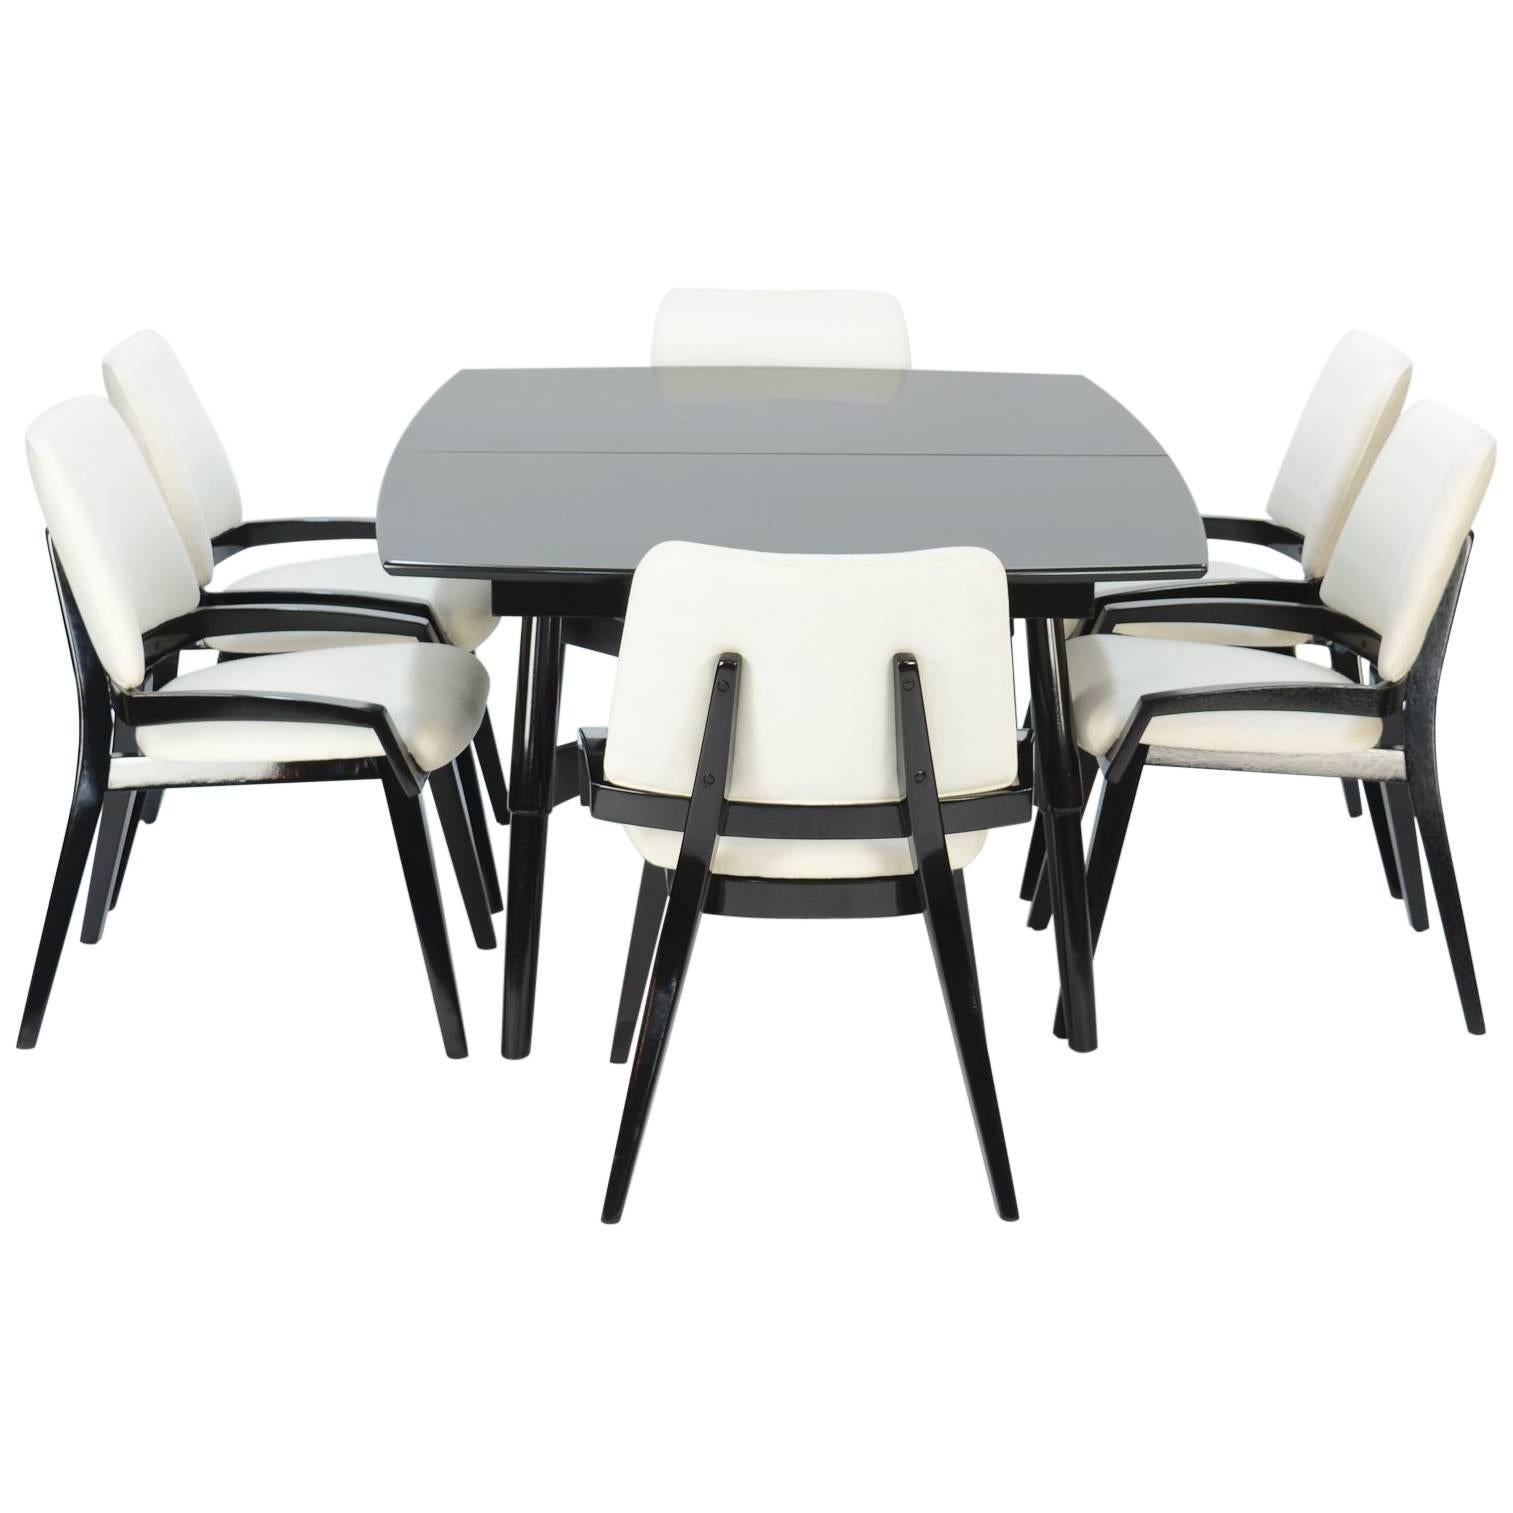 John Keal Ebonized Model 4058 Dining Table and Chairs for Brown Saltman